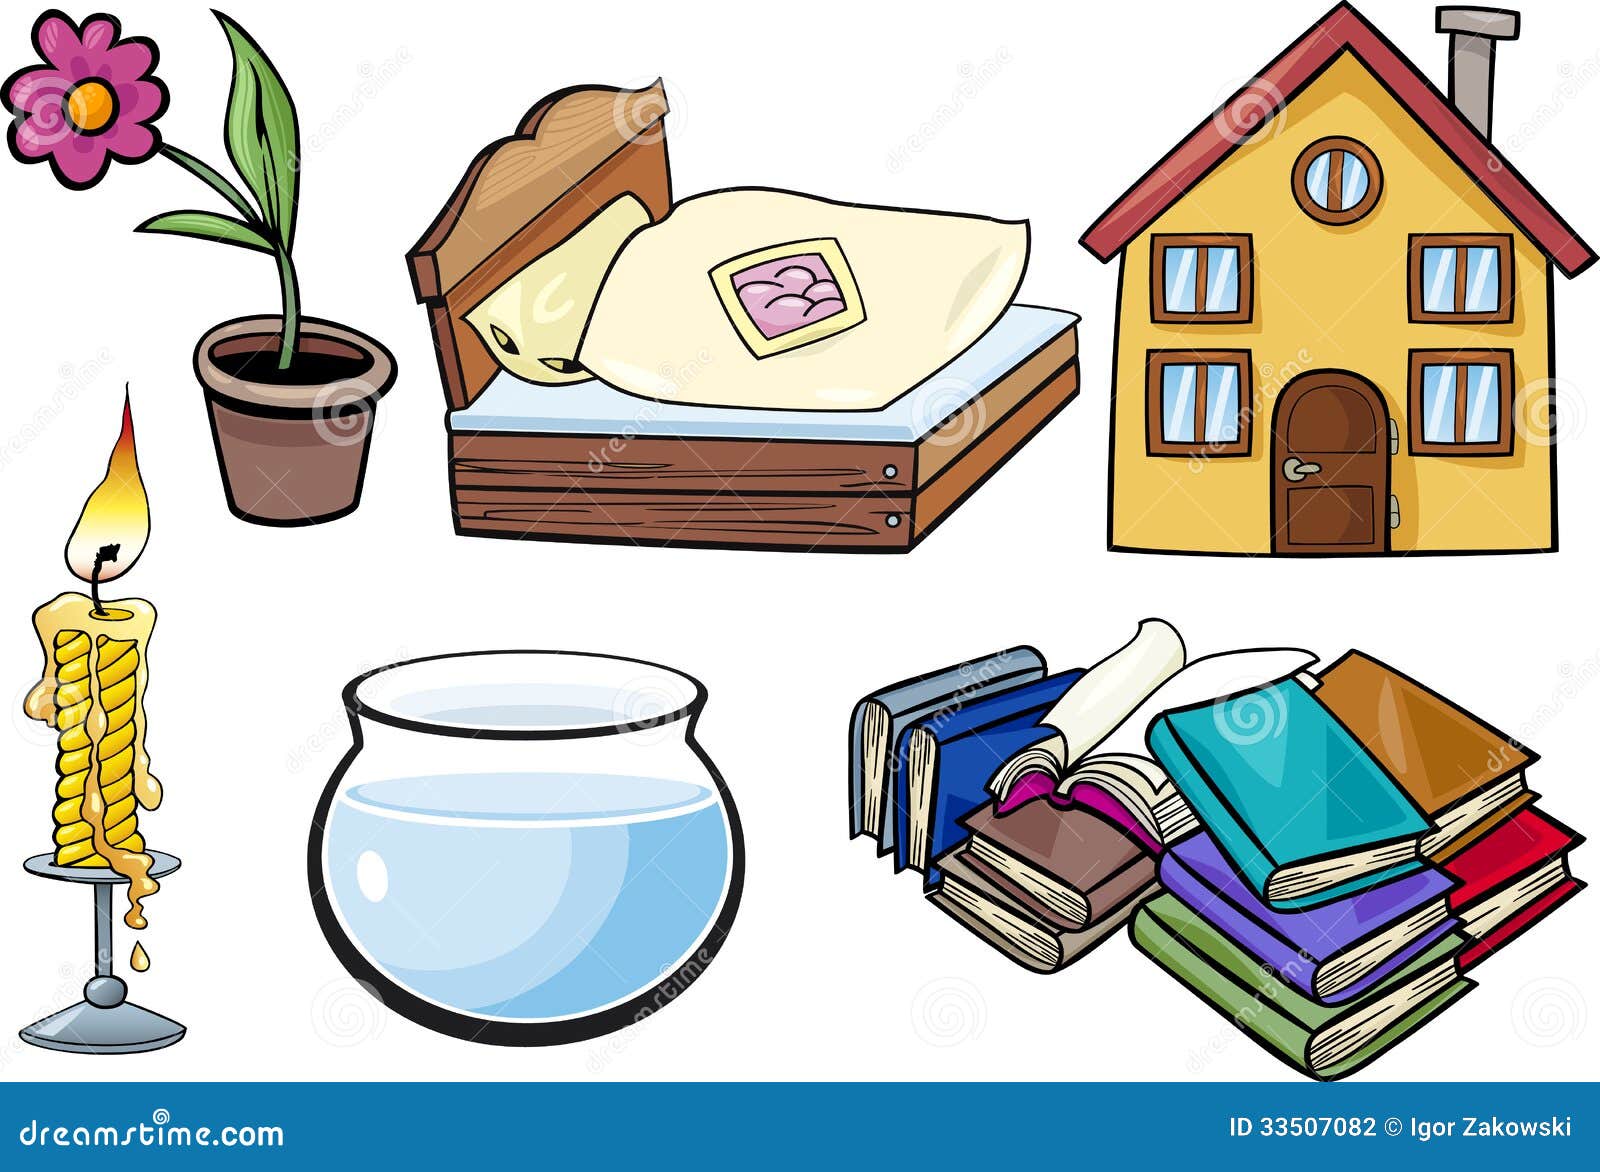 clipart photo object - photo #15